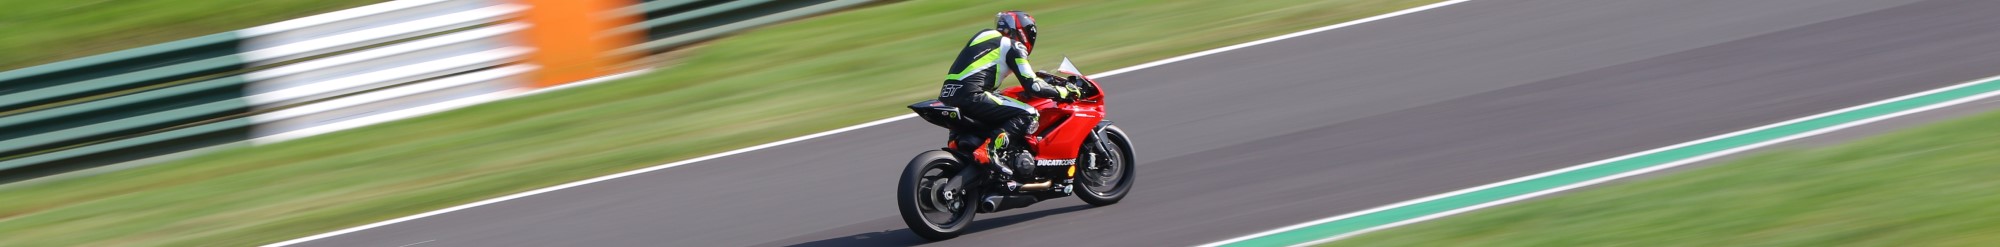 Bike Trackdays Questions Answered